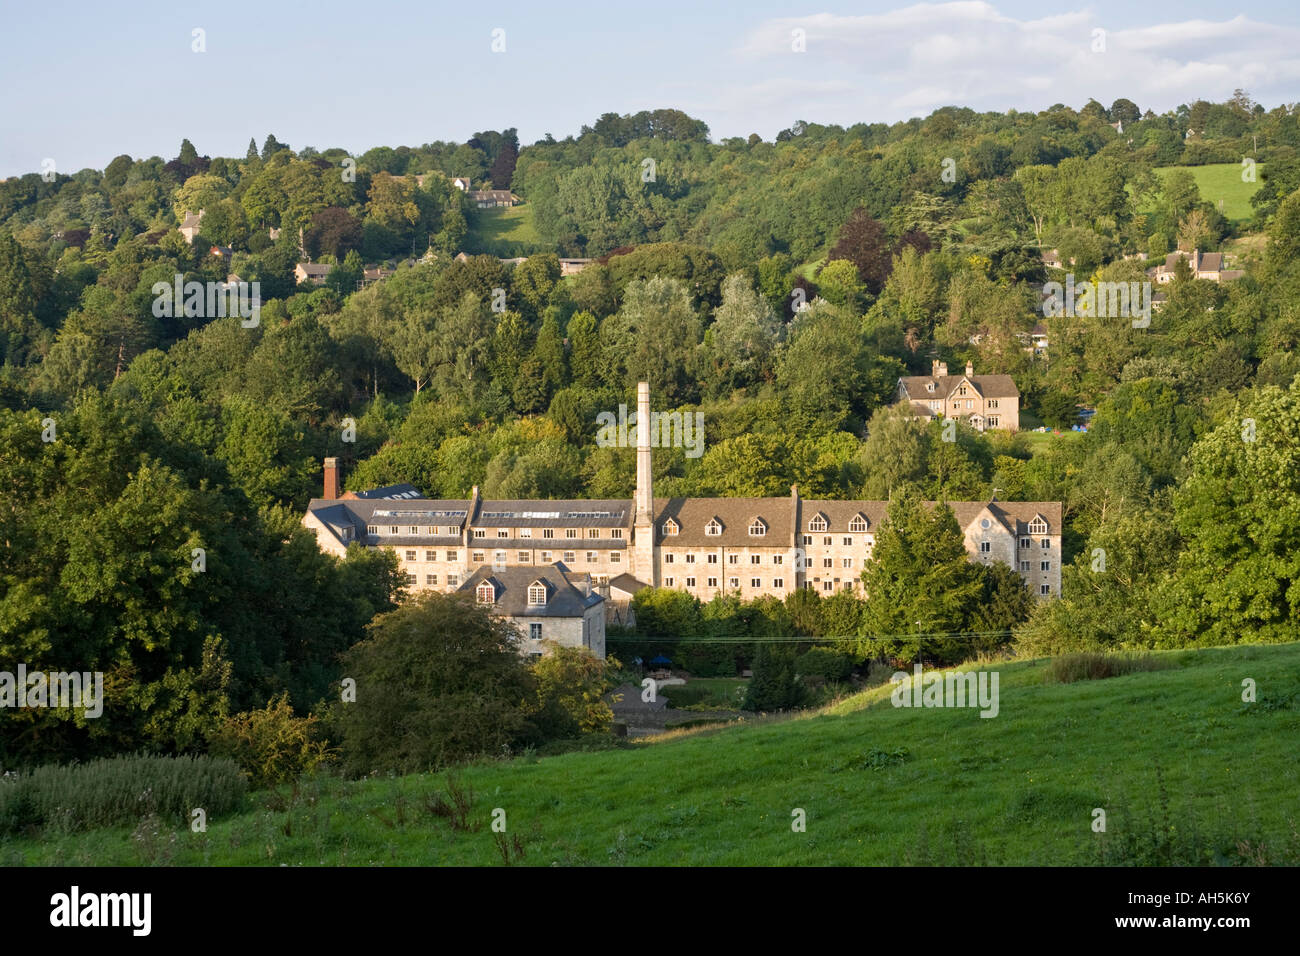 Dunkirk Mills near the Cotswold town of Nailsworth, Gloucestershire - Once a woollen mill and now converted to accommodation. Stock Photo